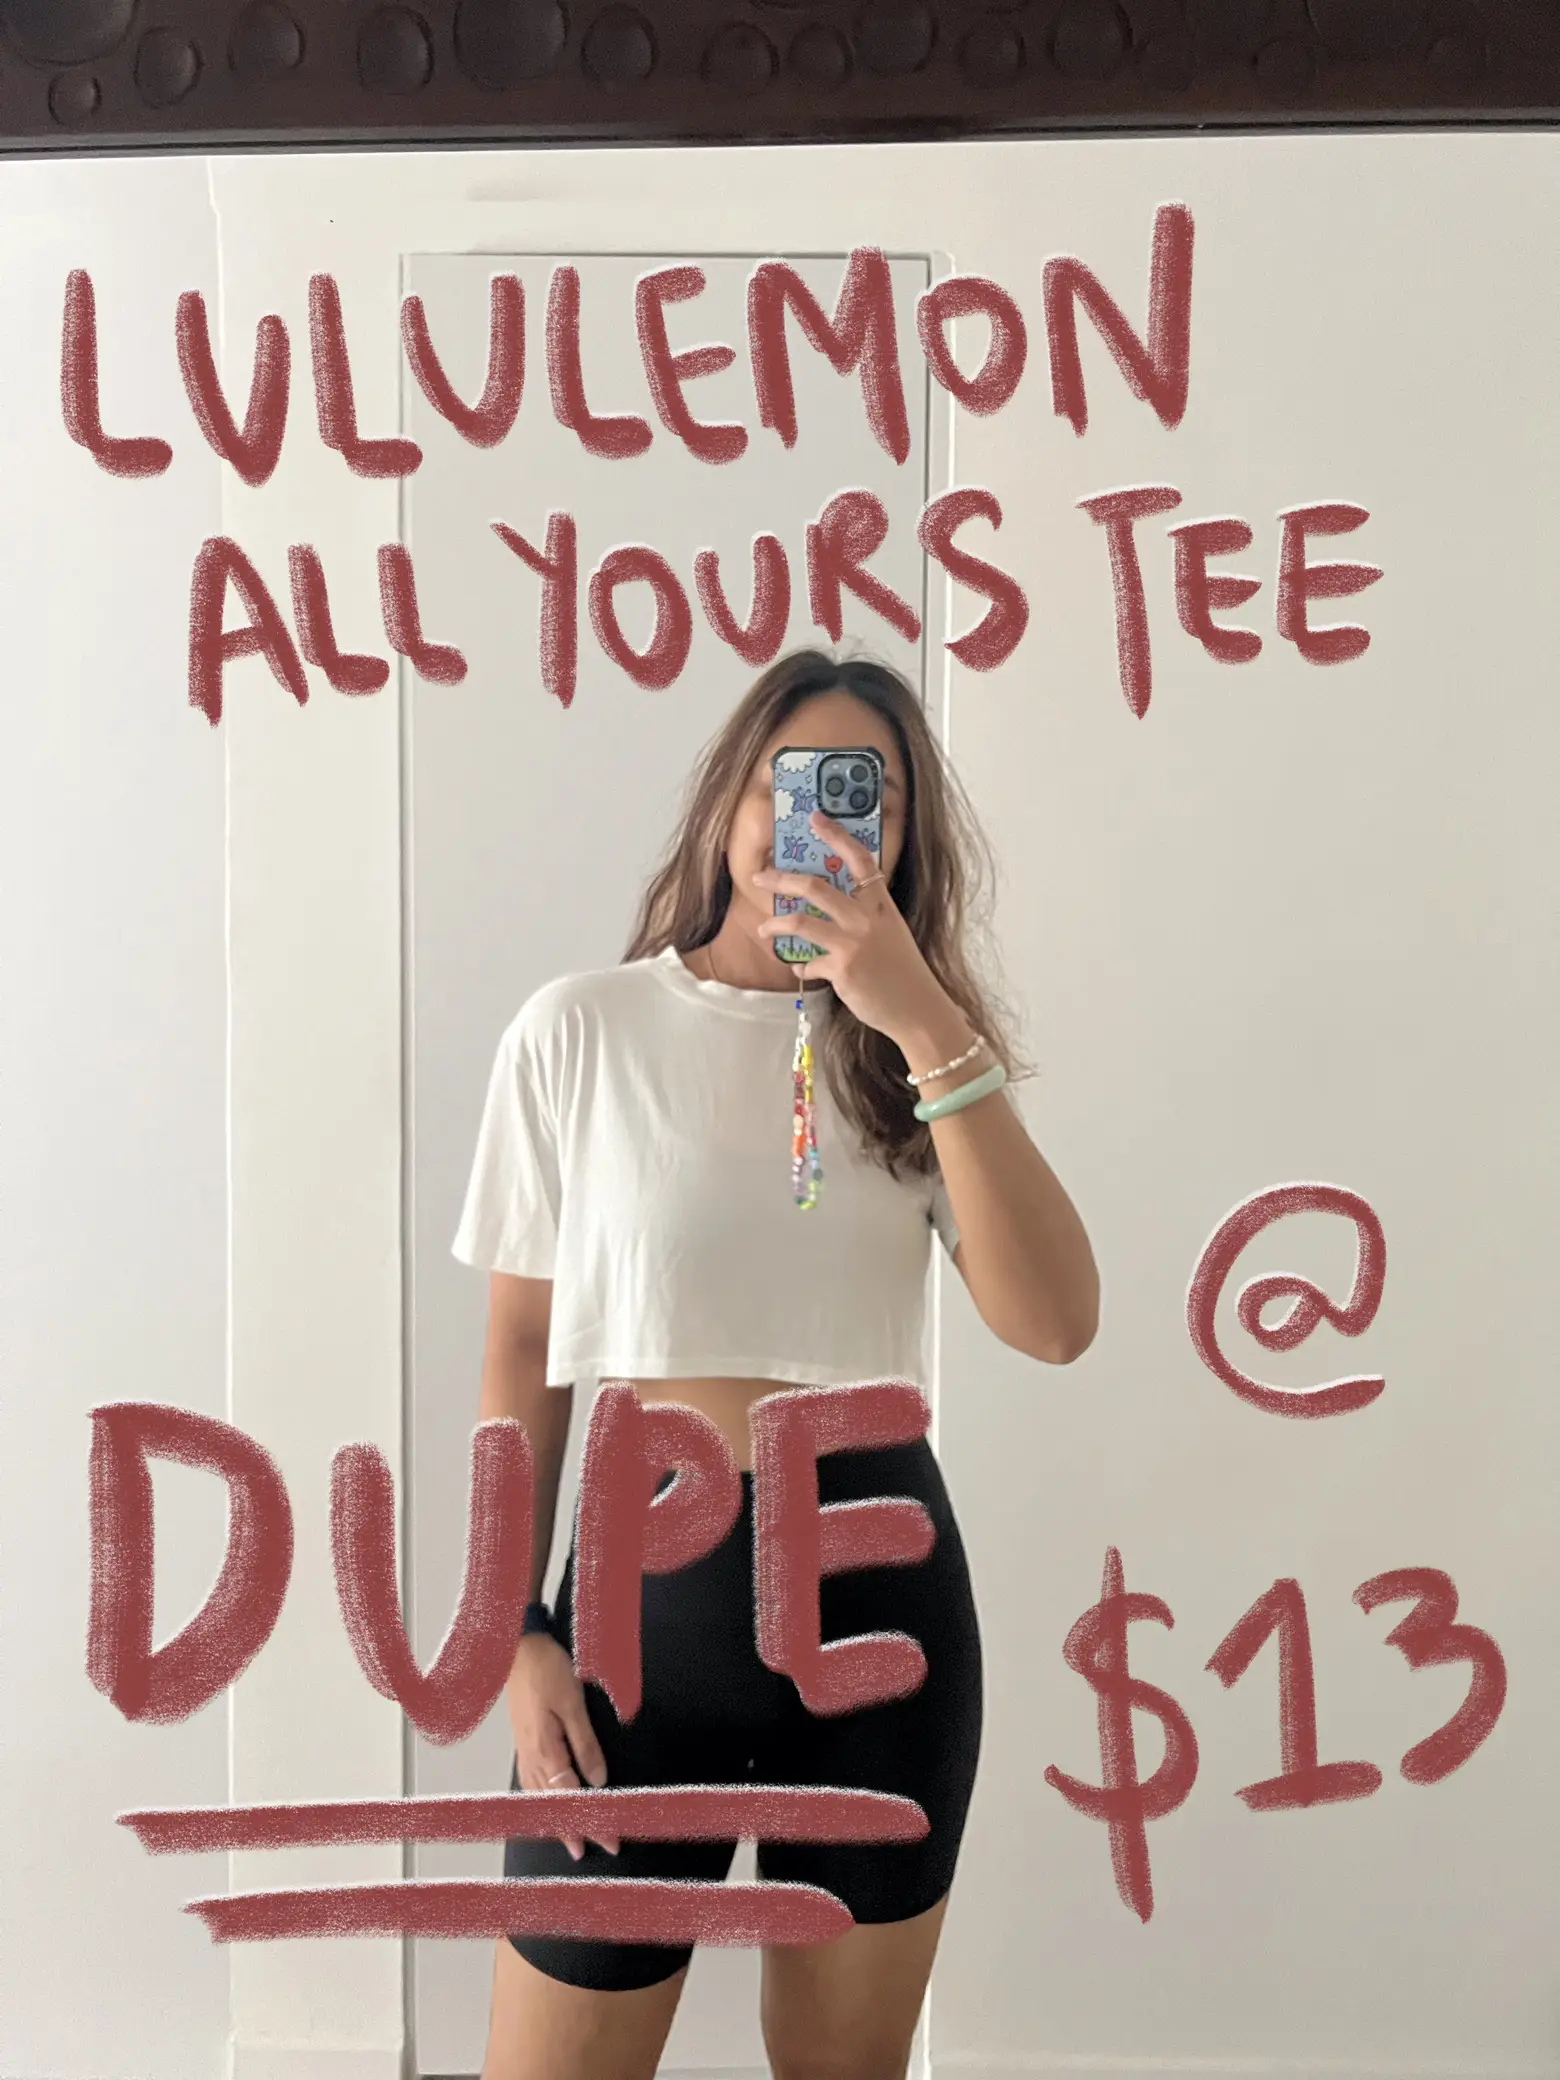 All yours cropped espresso ☕ : r/lululemon